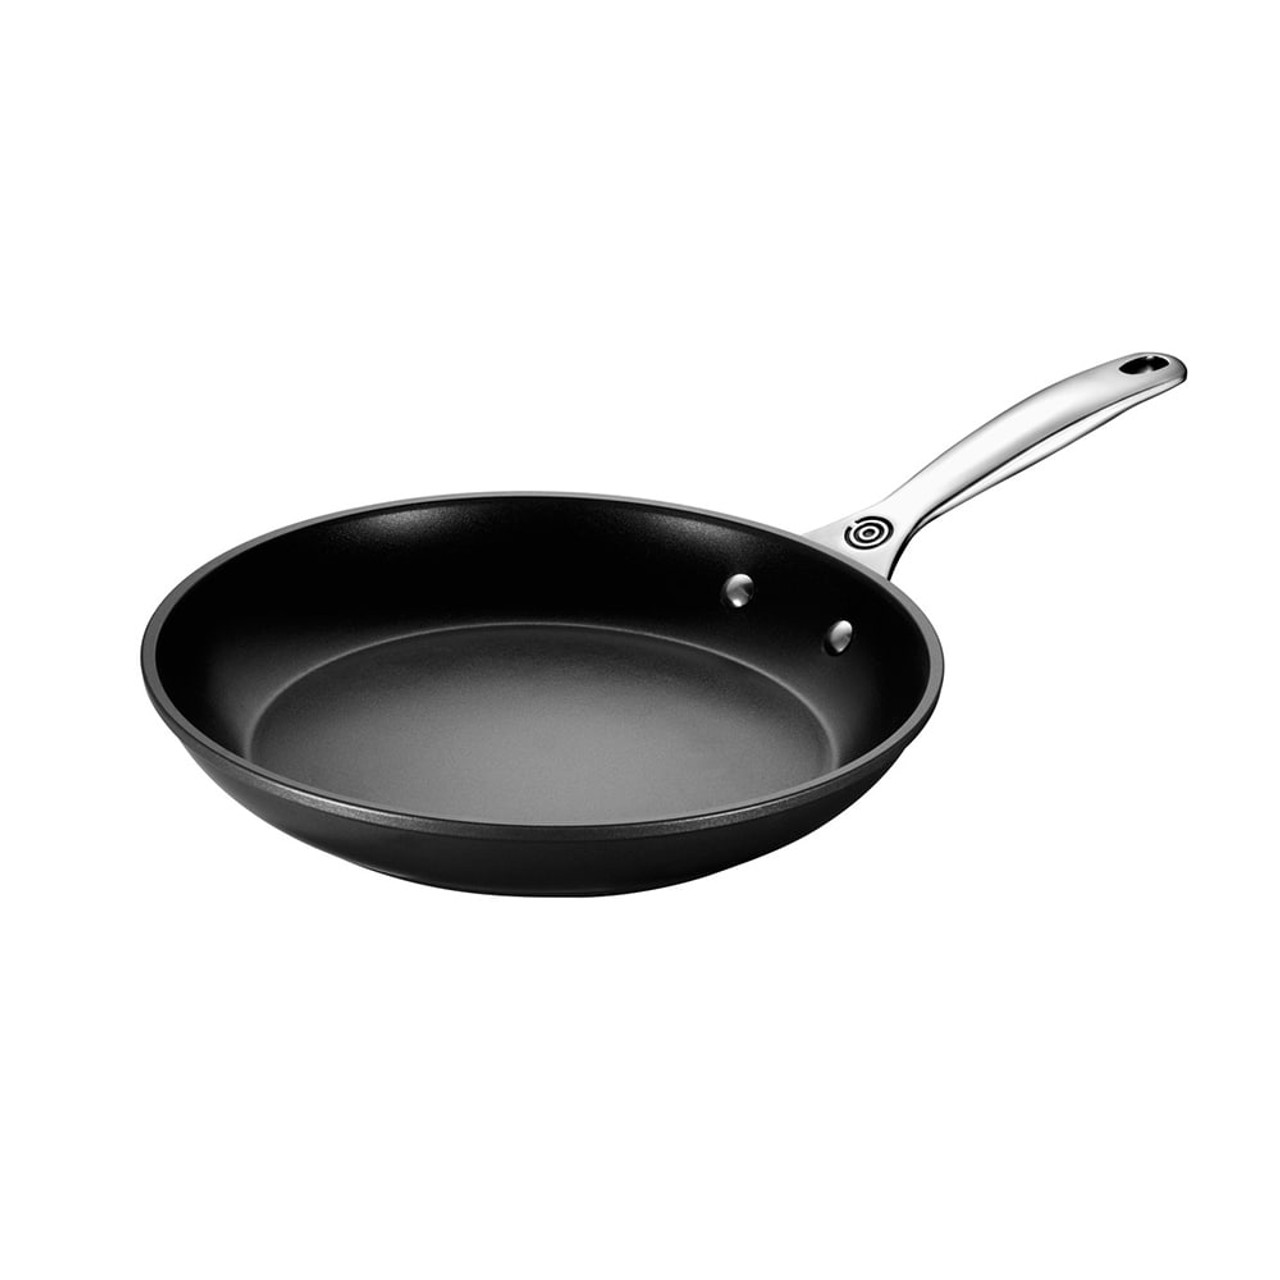 https://cdn11.bigcommerce.com/s-hccytny0od/images/stencil/1280x1280/products/3302/11826/le-creuset-tns-pro-fry-pan-10in__09333.1592345860.jpg?c=2?imbypass=on